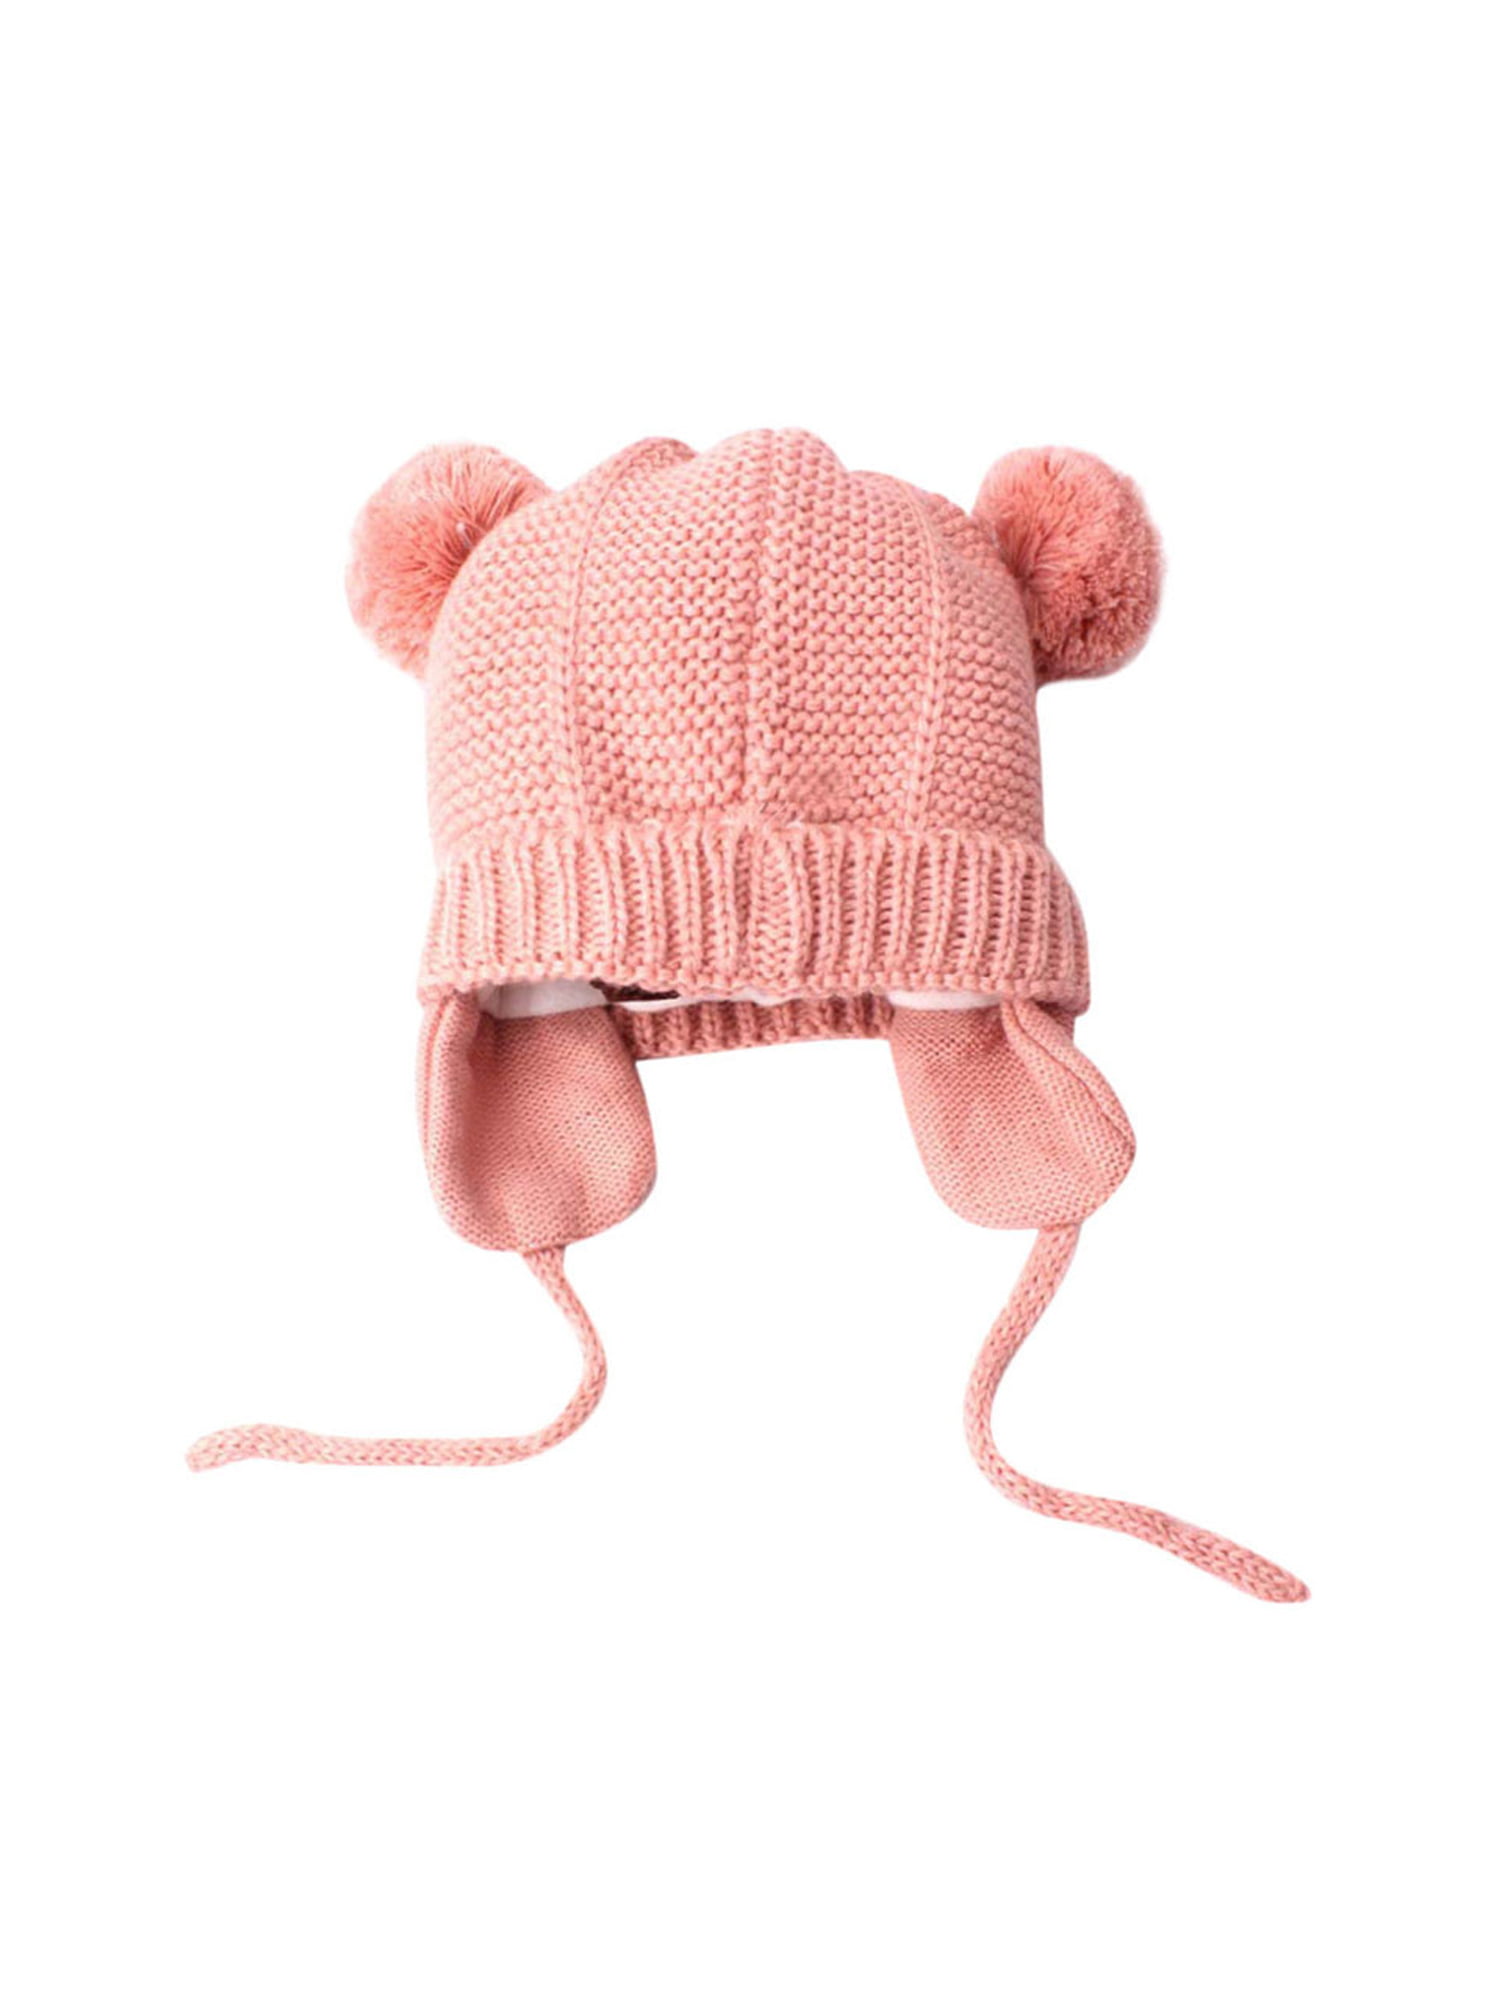 Clode Cute Baby Girls Toddler Infant Rabbit Ear Double Pompom Earflap Knitted Cap Winter Warm Beanie Hat 